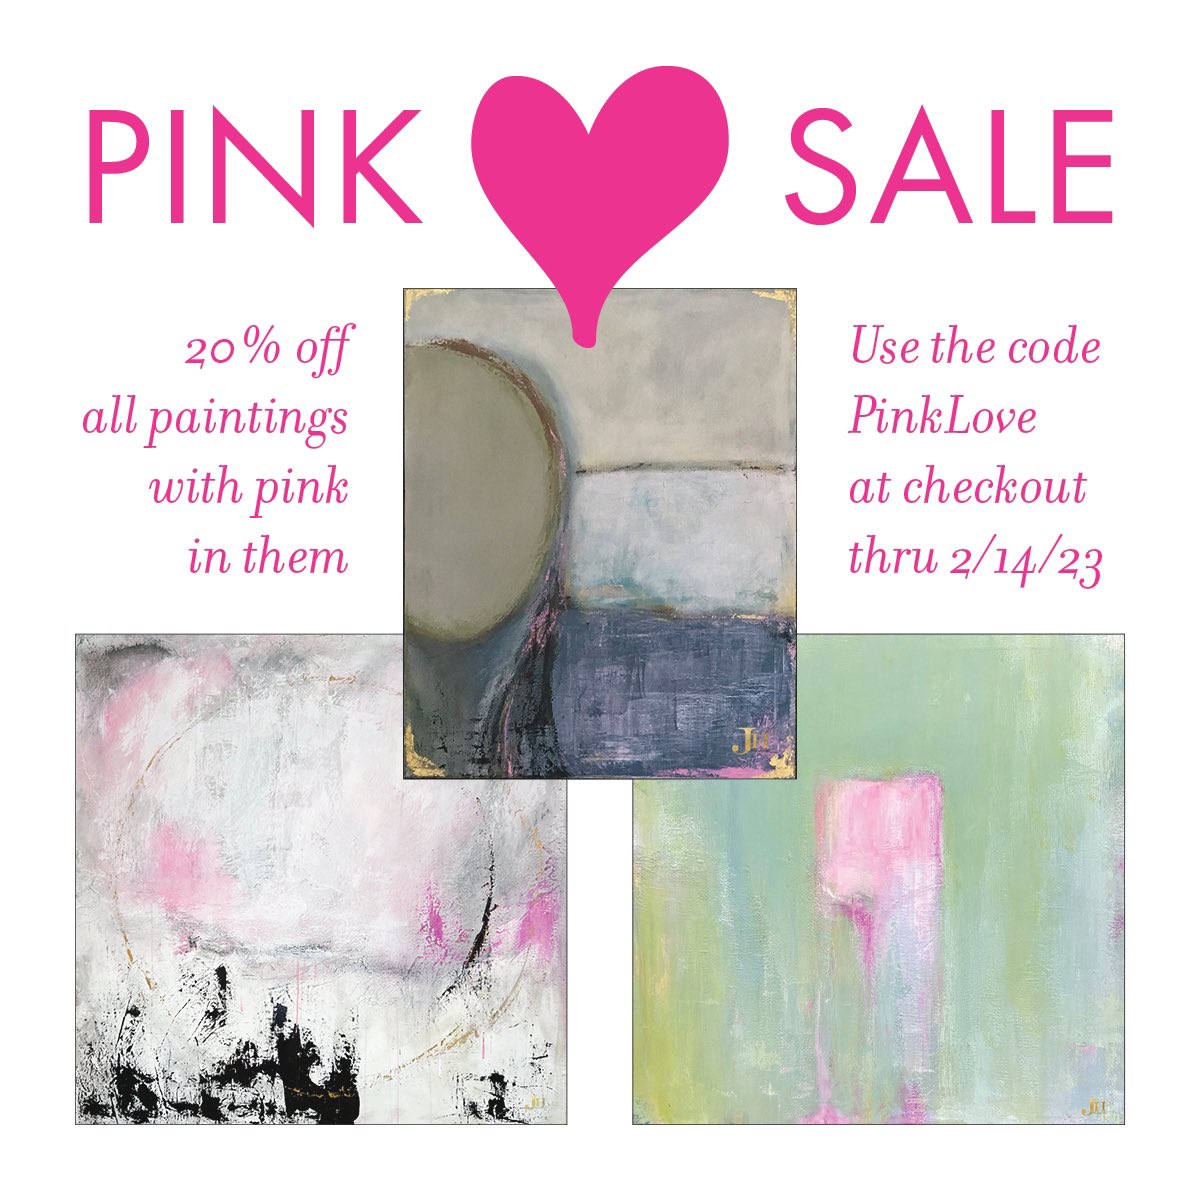 Hot pink. Baby pink. Barely pink. Any amount of pink in any painting. All qualify for a 20% discount—today through midnight on February 14. Use the code PINKLOVE at checkout. 

#art #pink #sale #BeautyWillSaveTheWorld